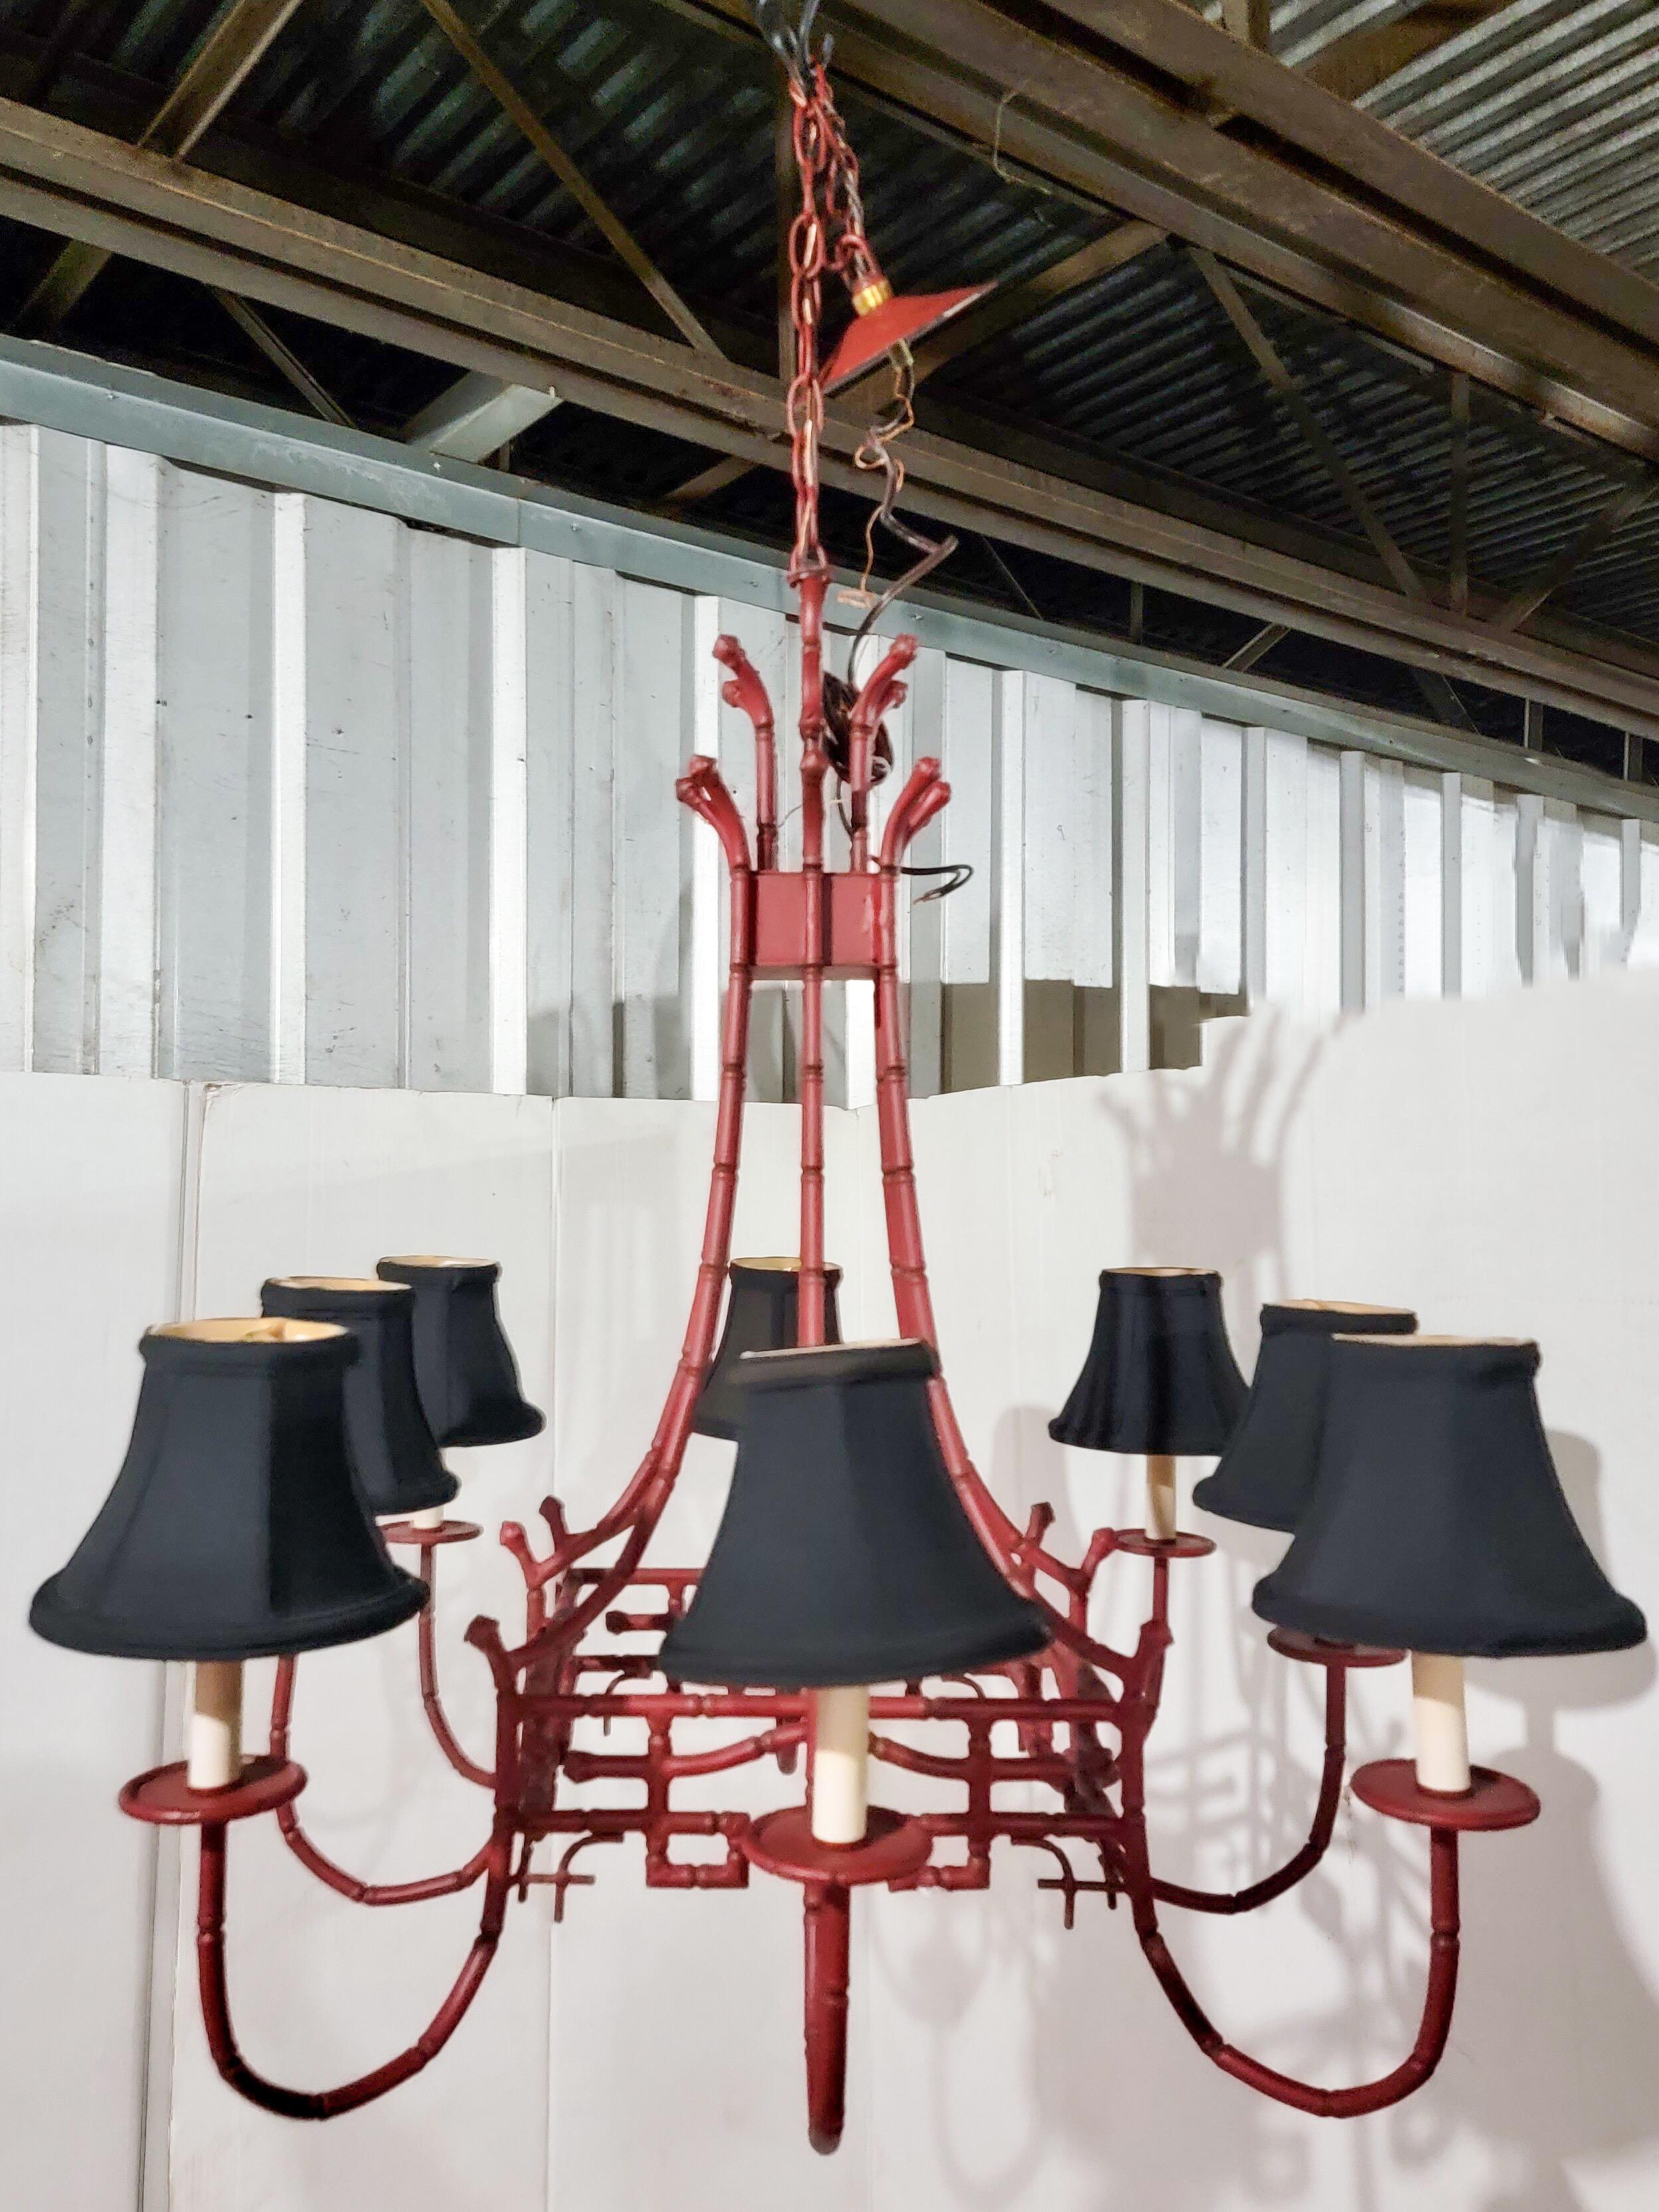 Wonderful and just in time for the holidays! This is a Regency style red tole painted faux bamboo pagoda form chandelier in very good condition. It is UL listed and has about 16” of chain.